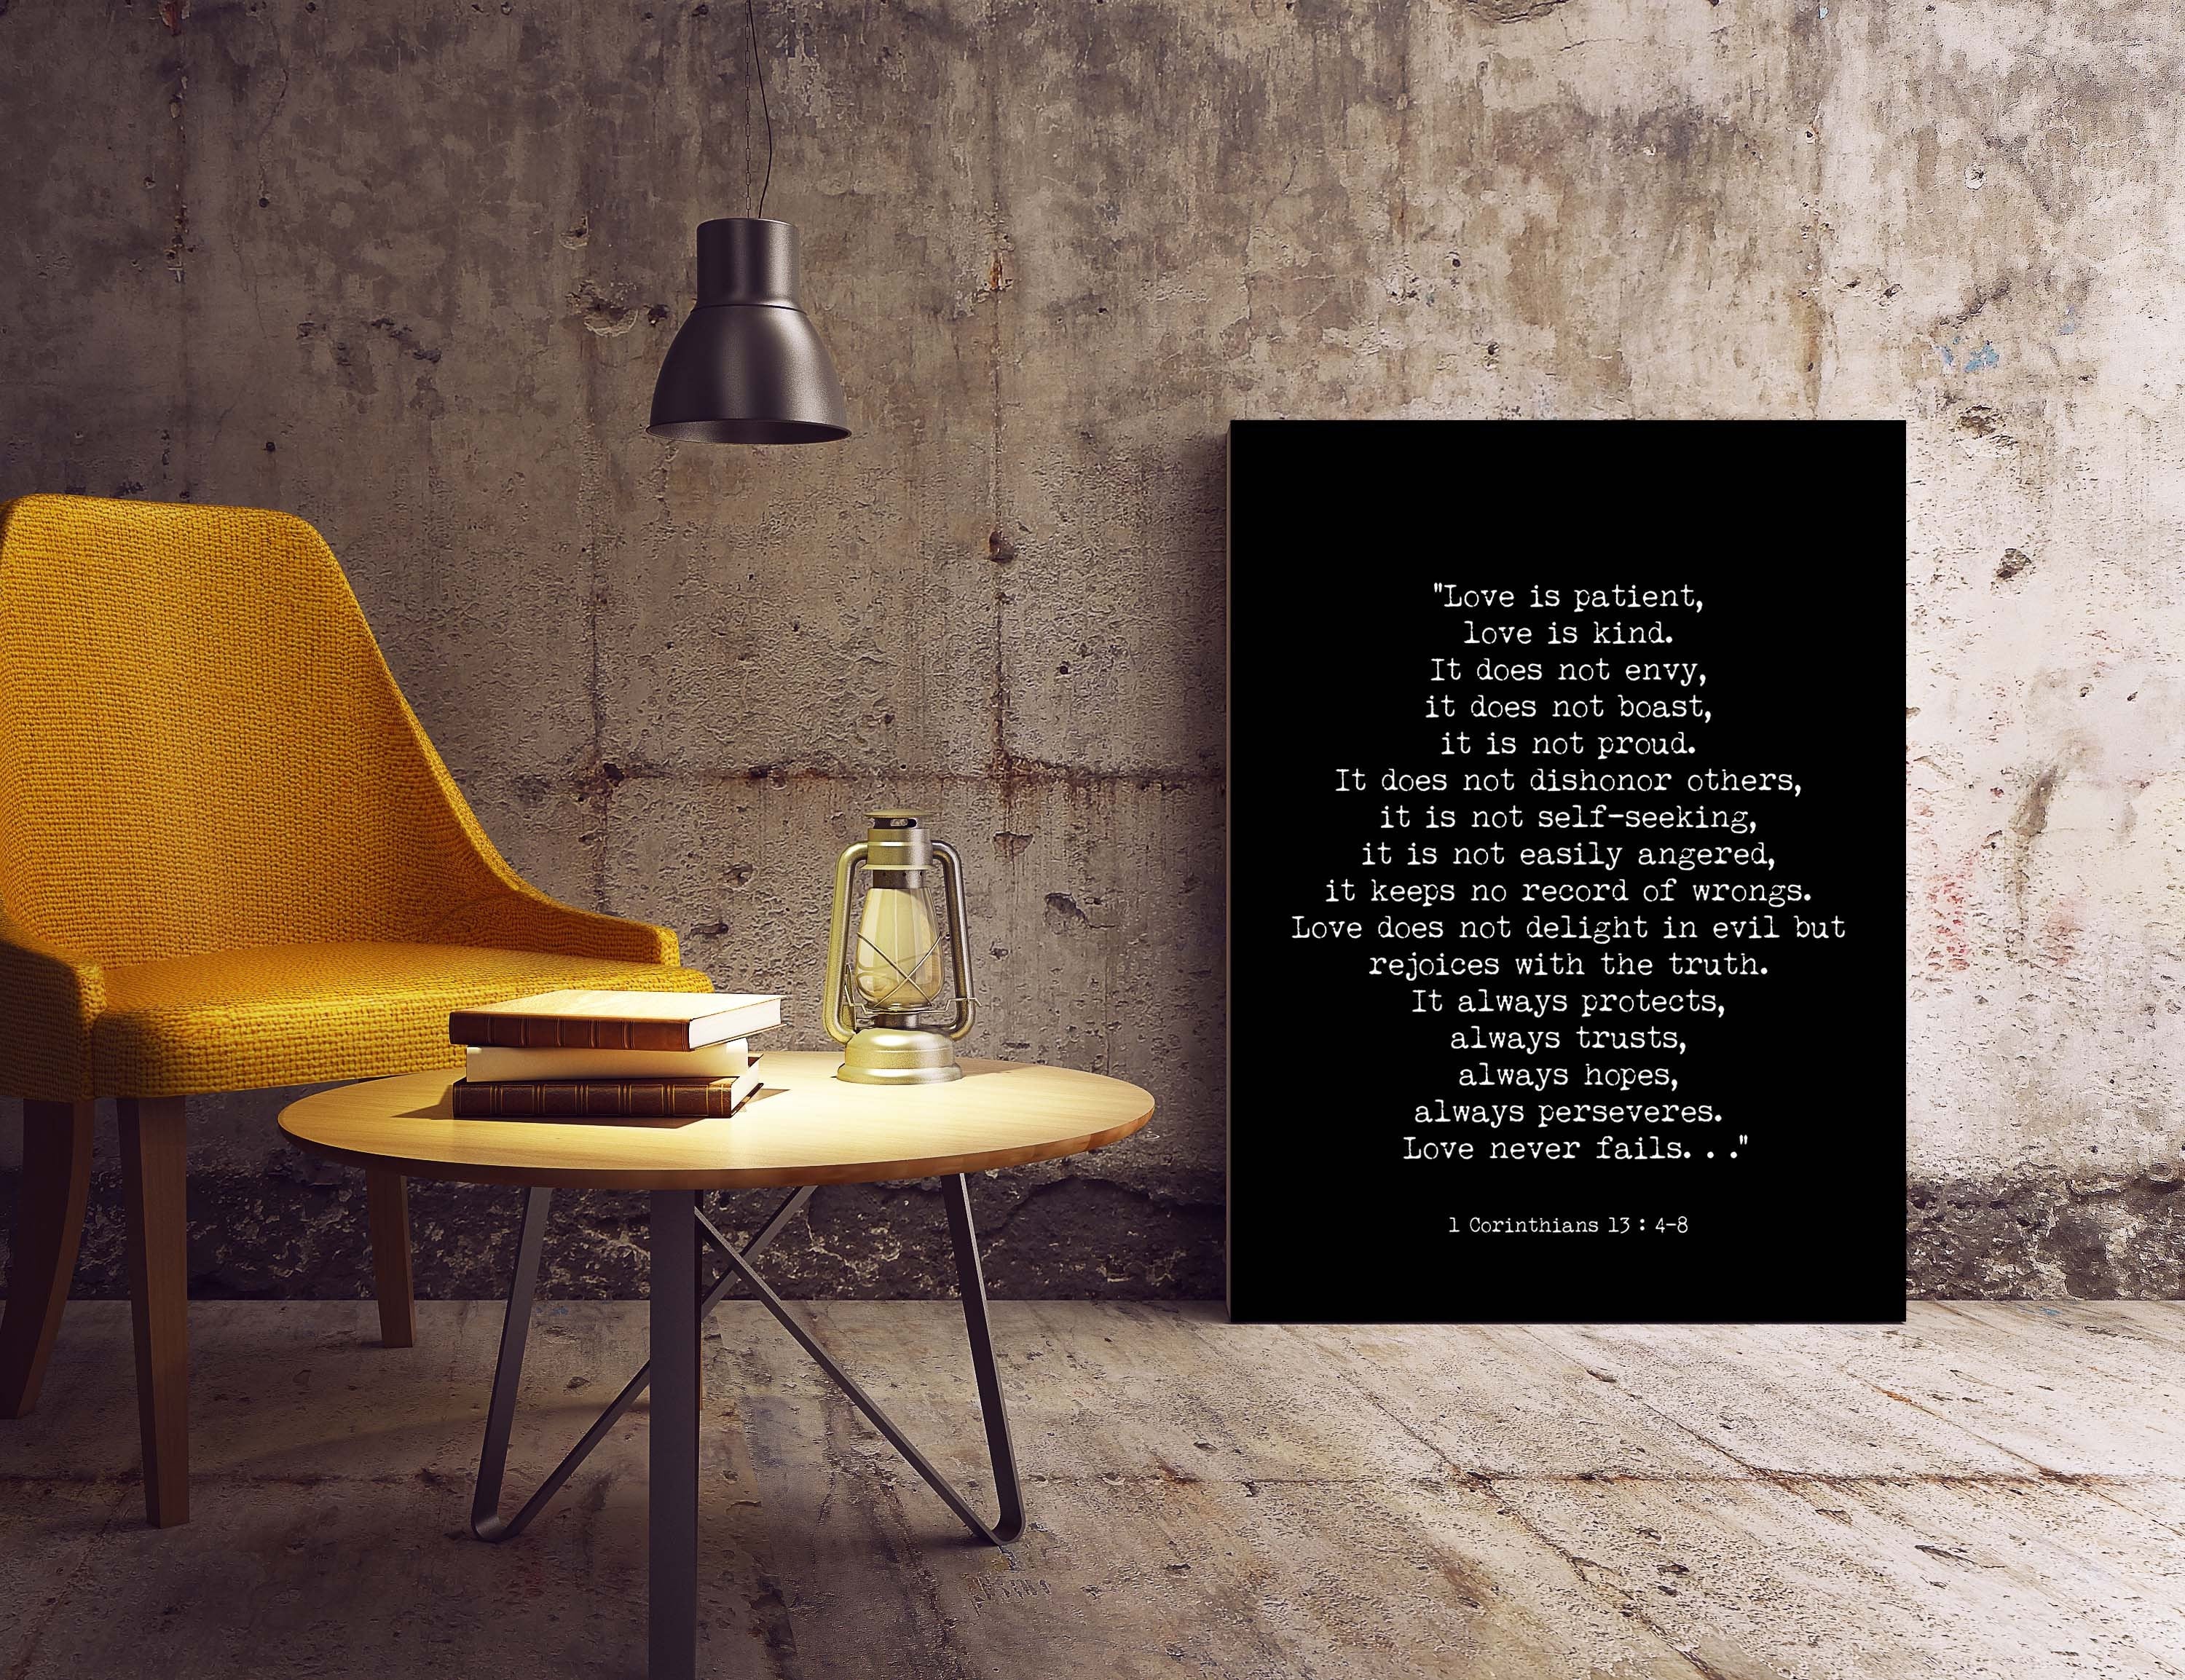 Bible Verse 1 Corinthians 13 Quote Print, Love is Patient Wall Art in Black & White